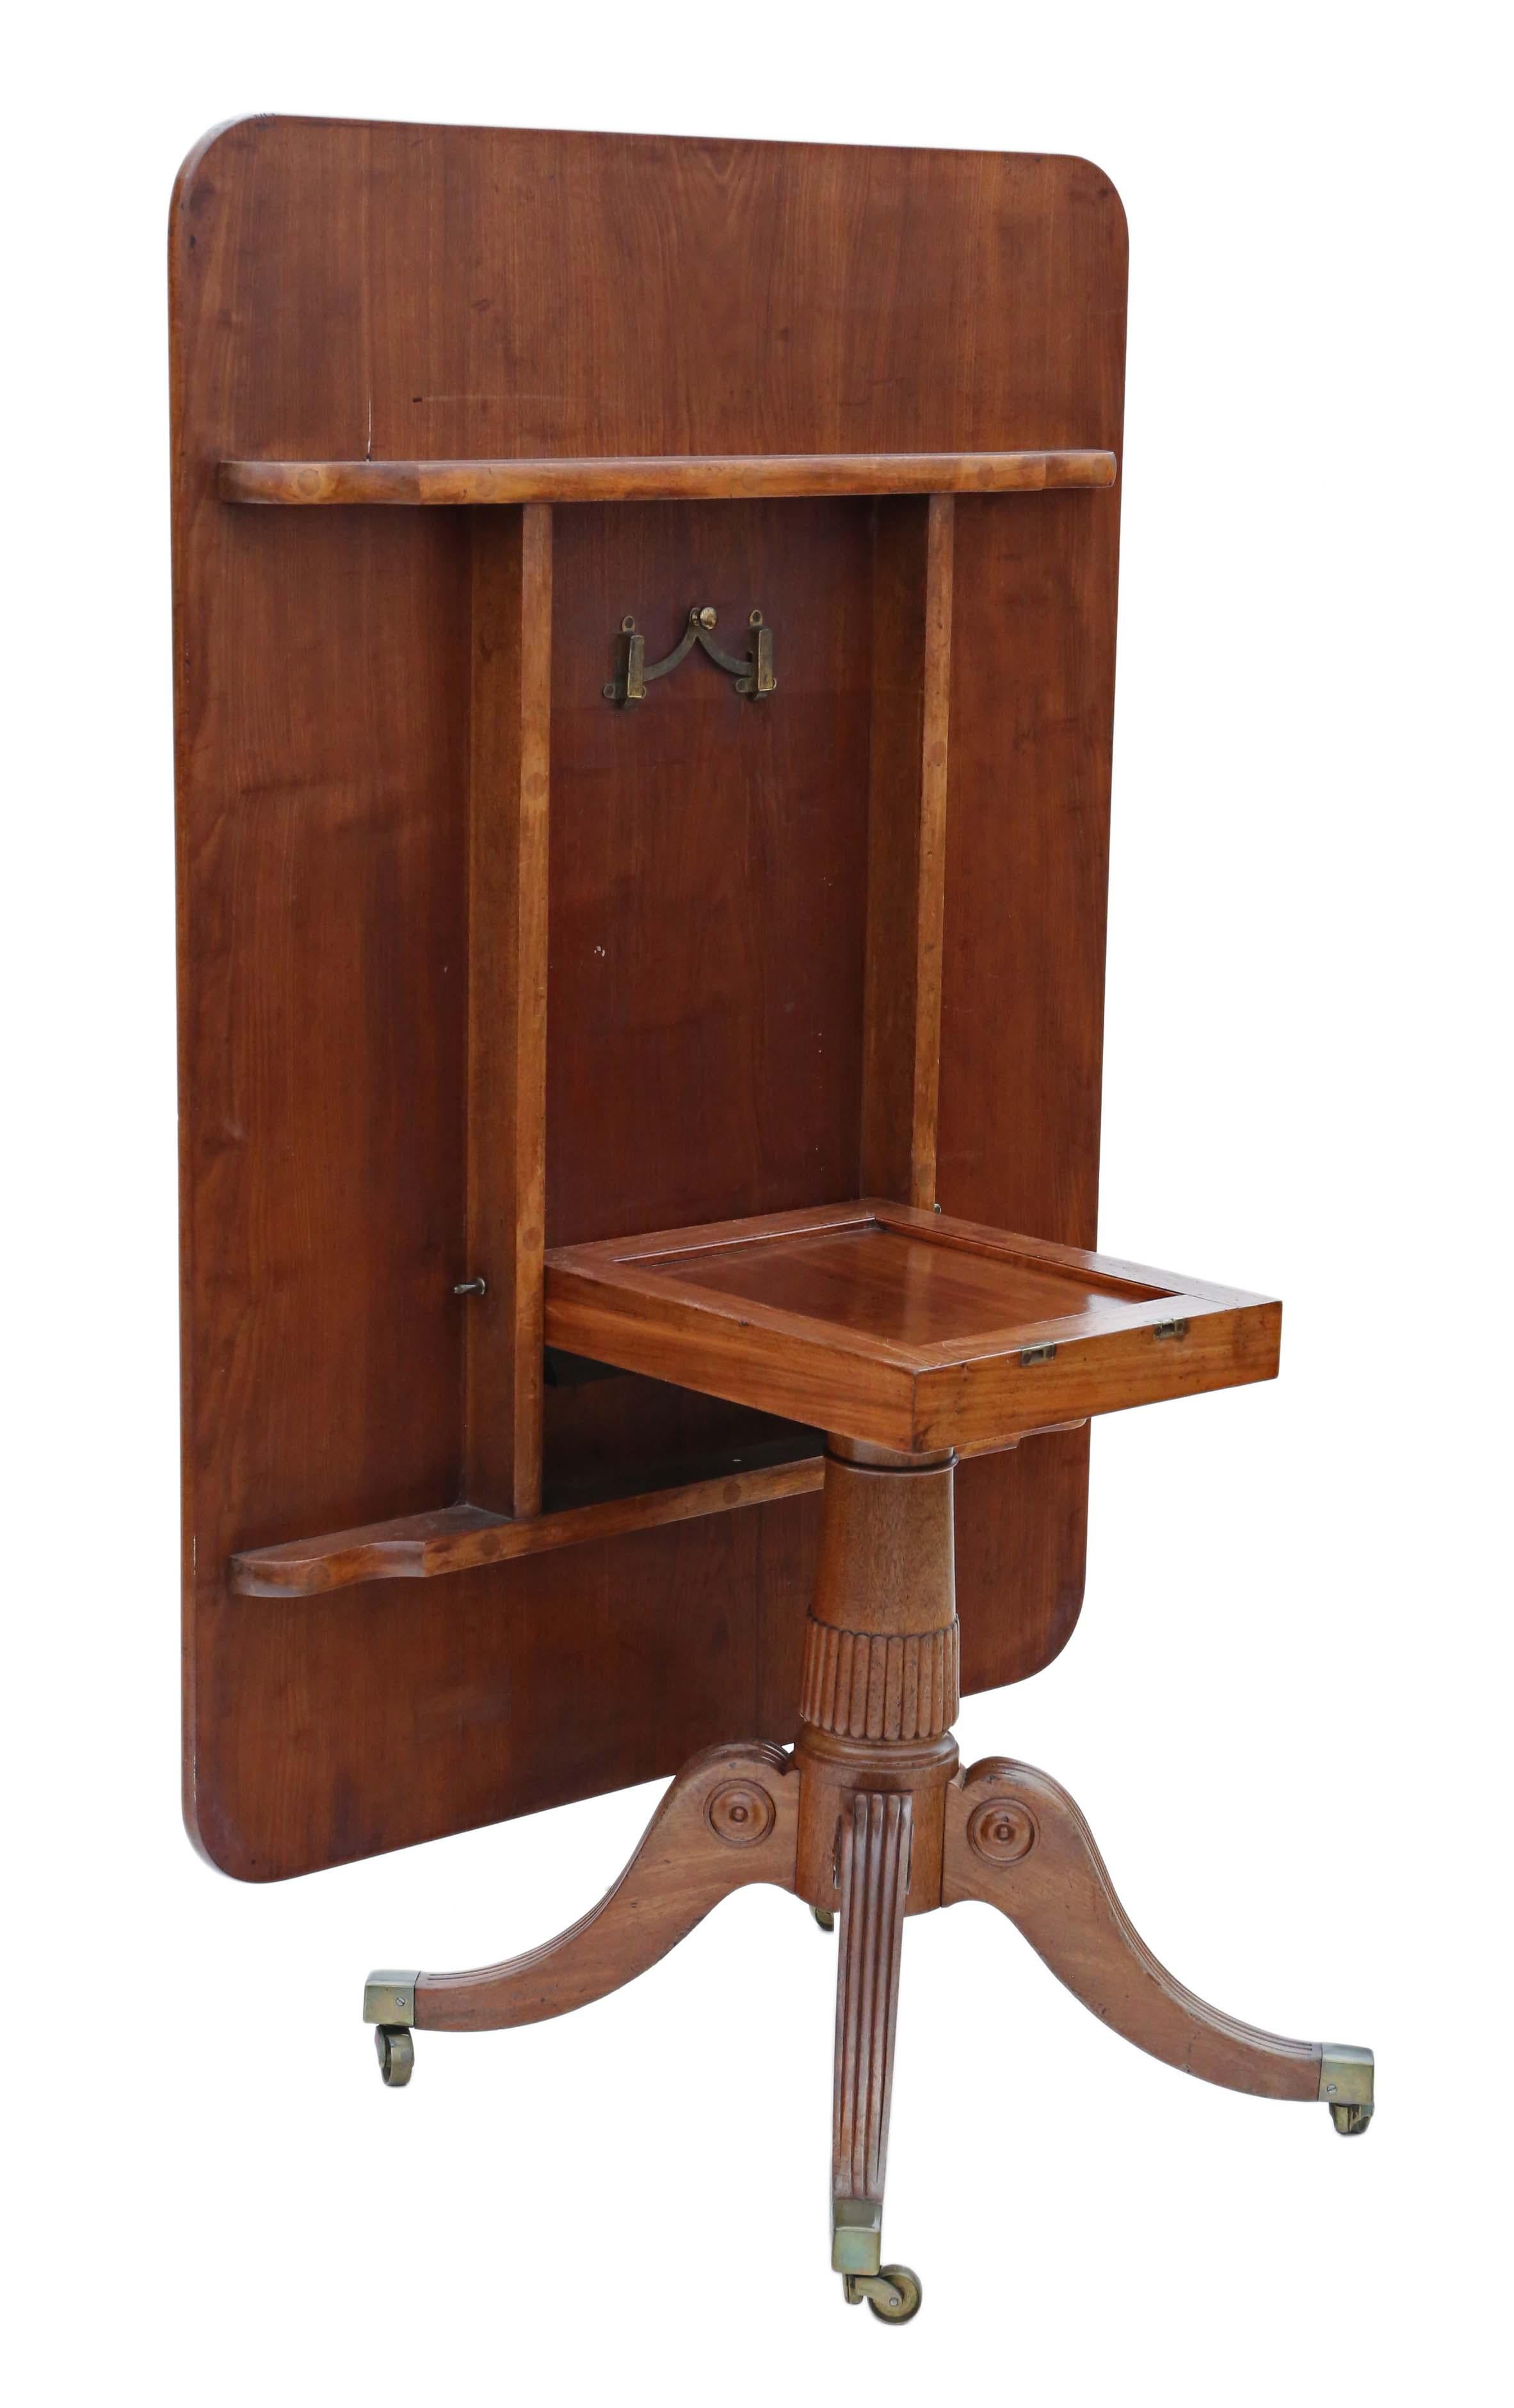 Antique Regency Inlaid Mahogany Loo Breakfast Centre Table Tilt Top In Good Condition In Wisbech, Cambridgeshire